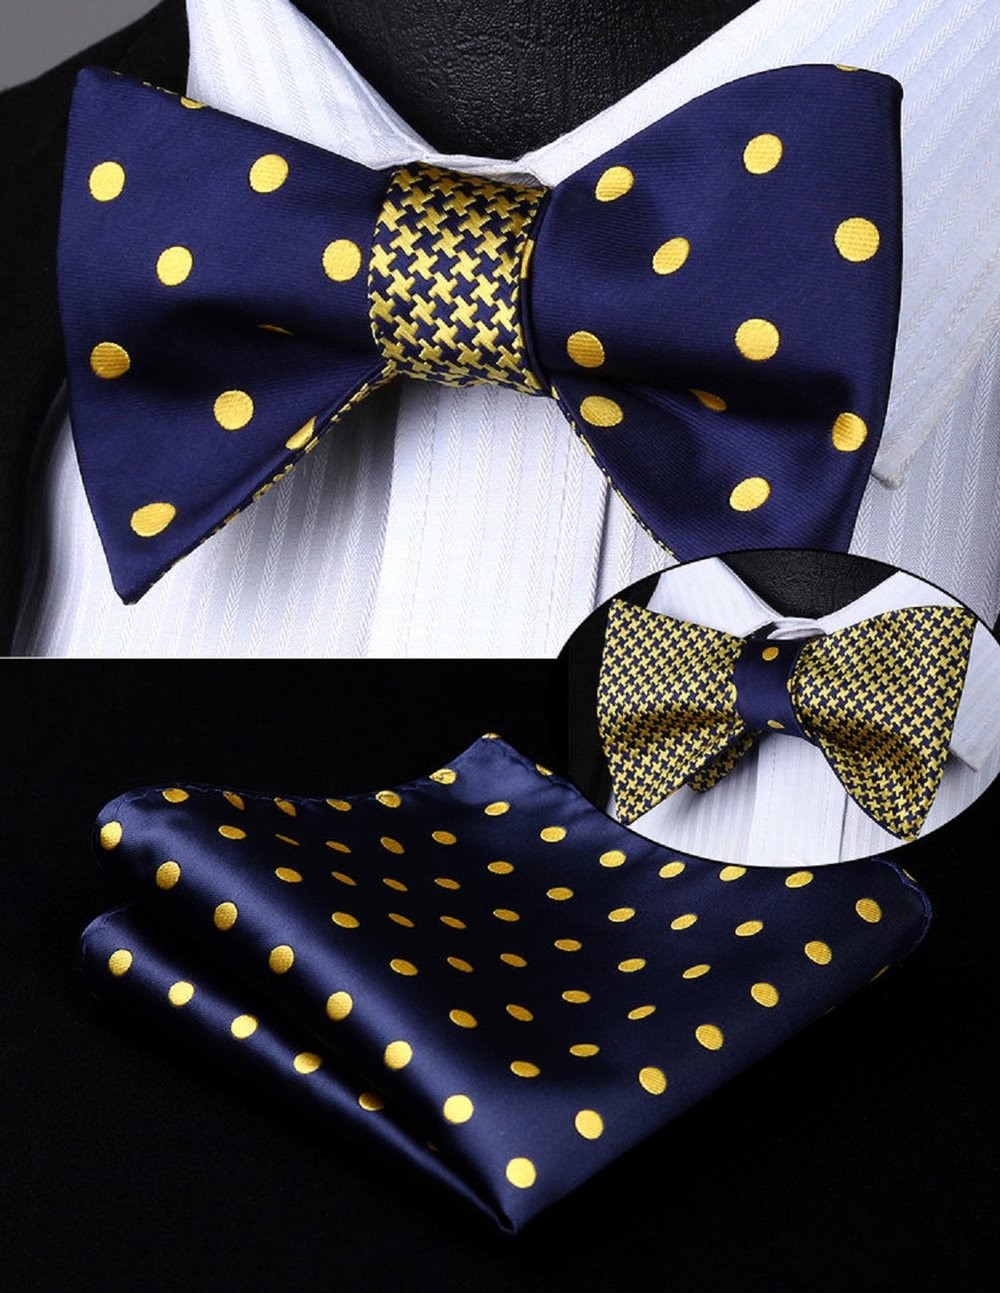 A Gold, Blue Hounds tooth and Polka Pattern Silk Self Tie Bow Tie, Matching Pocket Square  